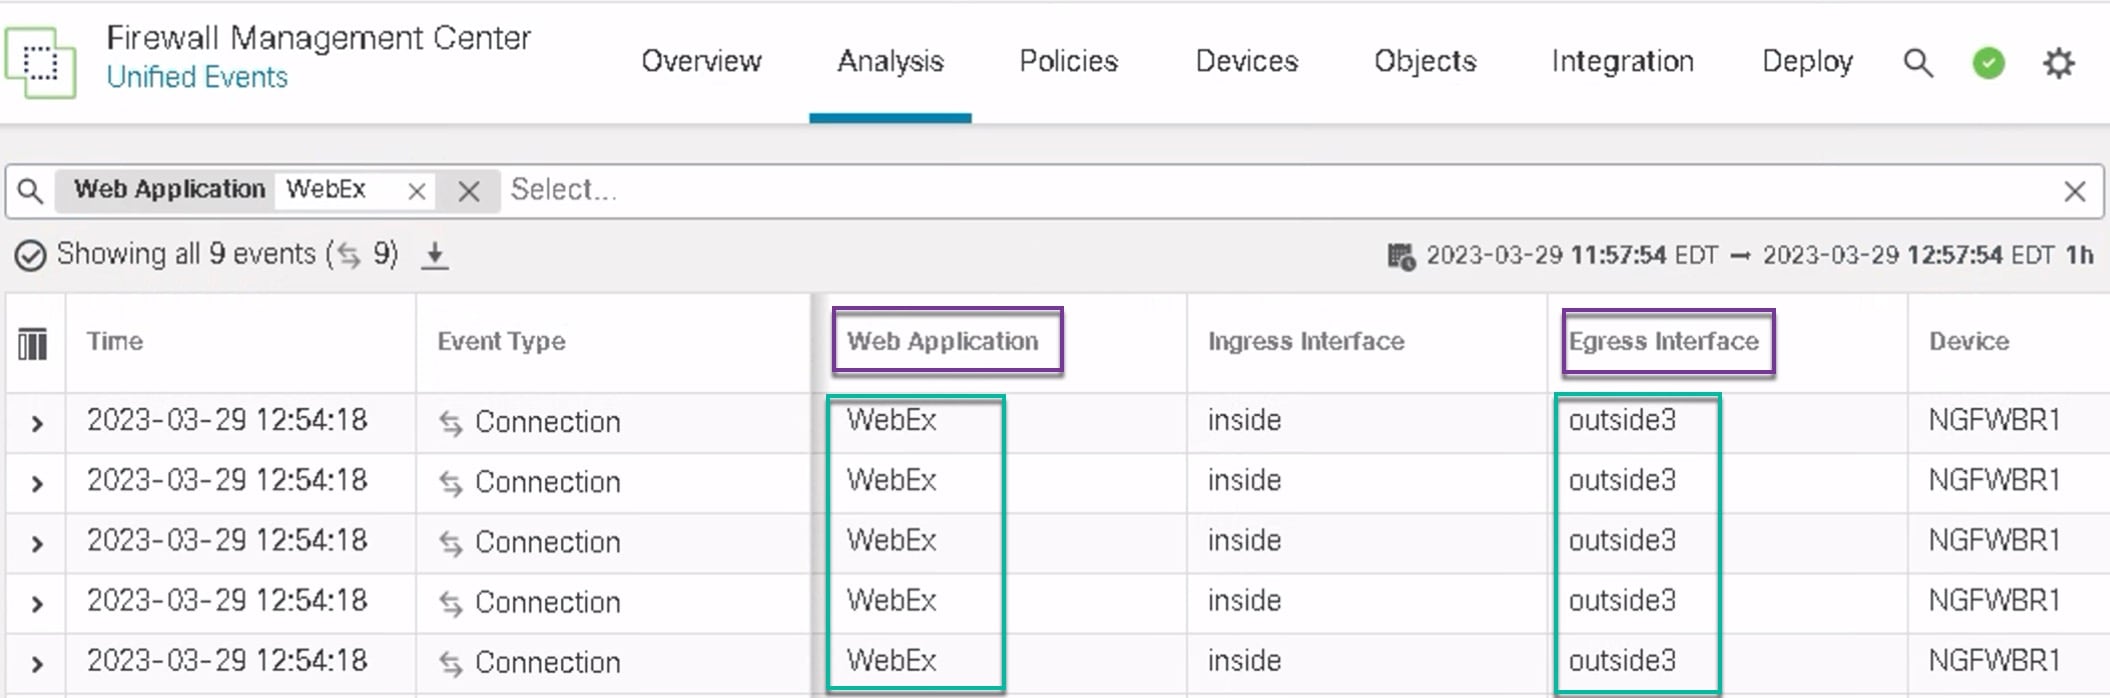 In the image, WebEx application traffic is sent out through the outside3 interface as seen on the Unified events page.